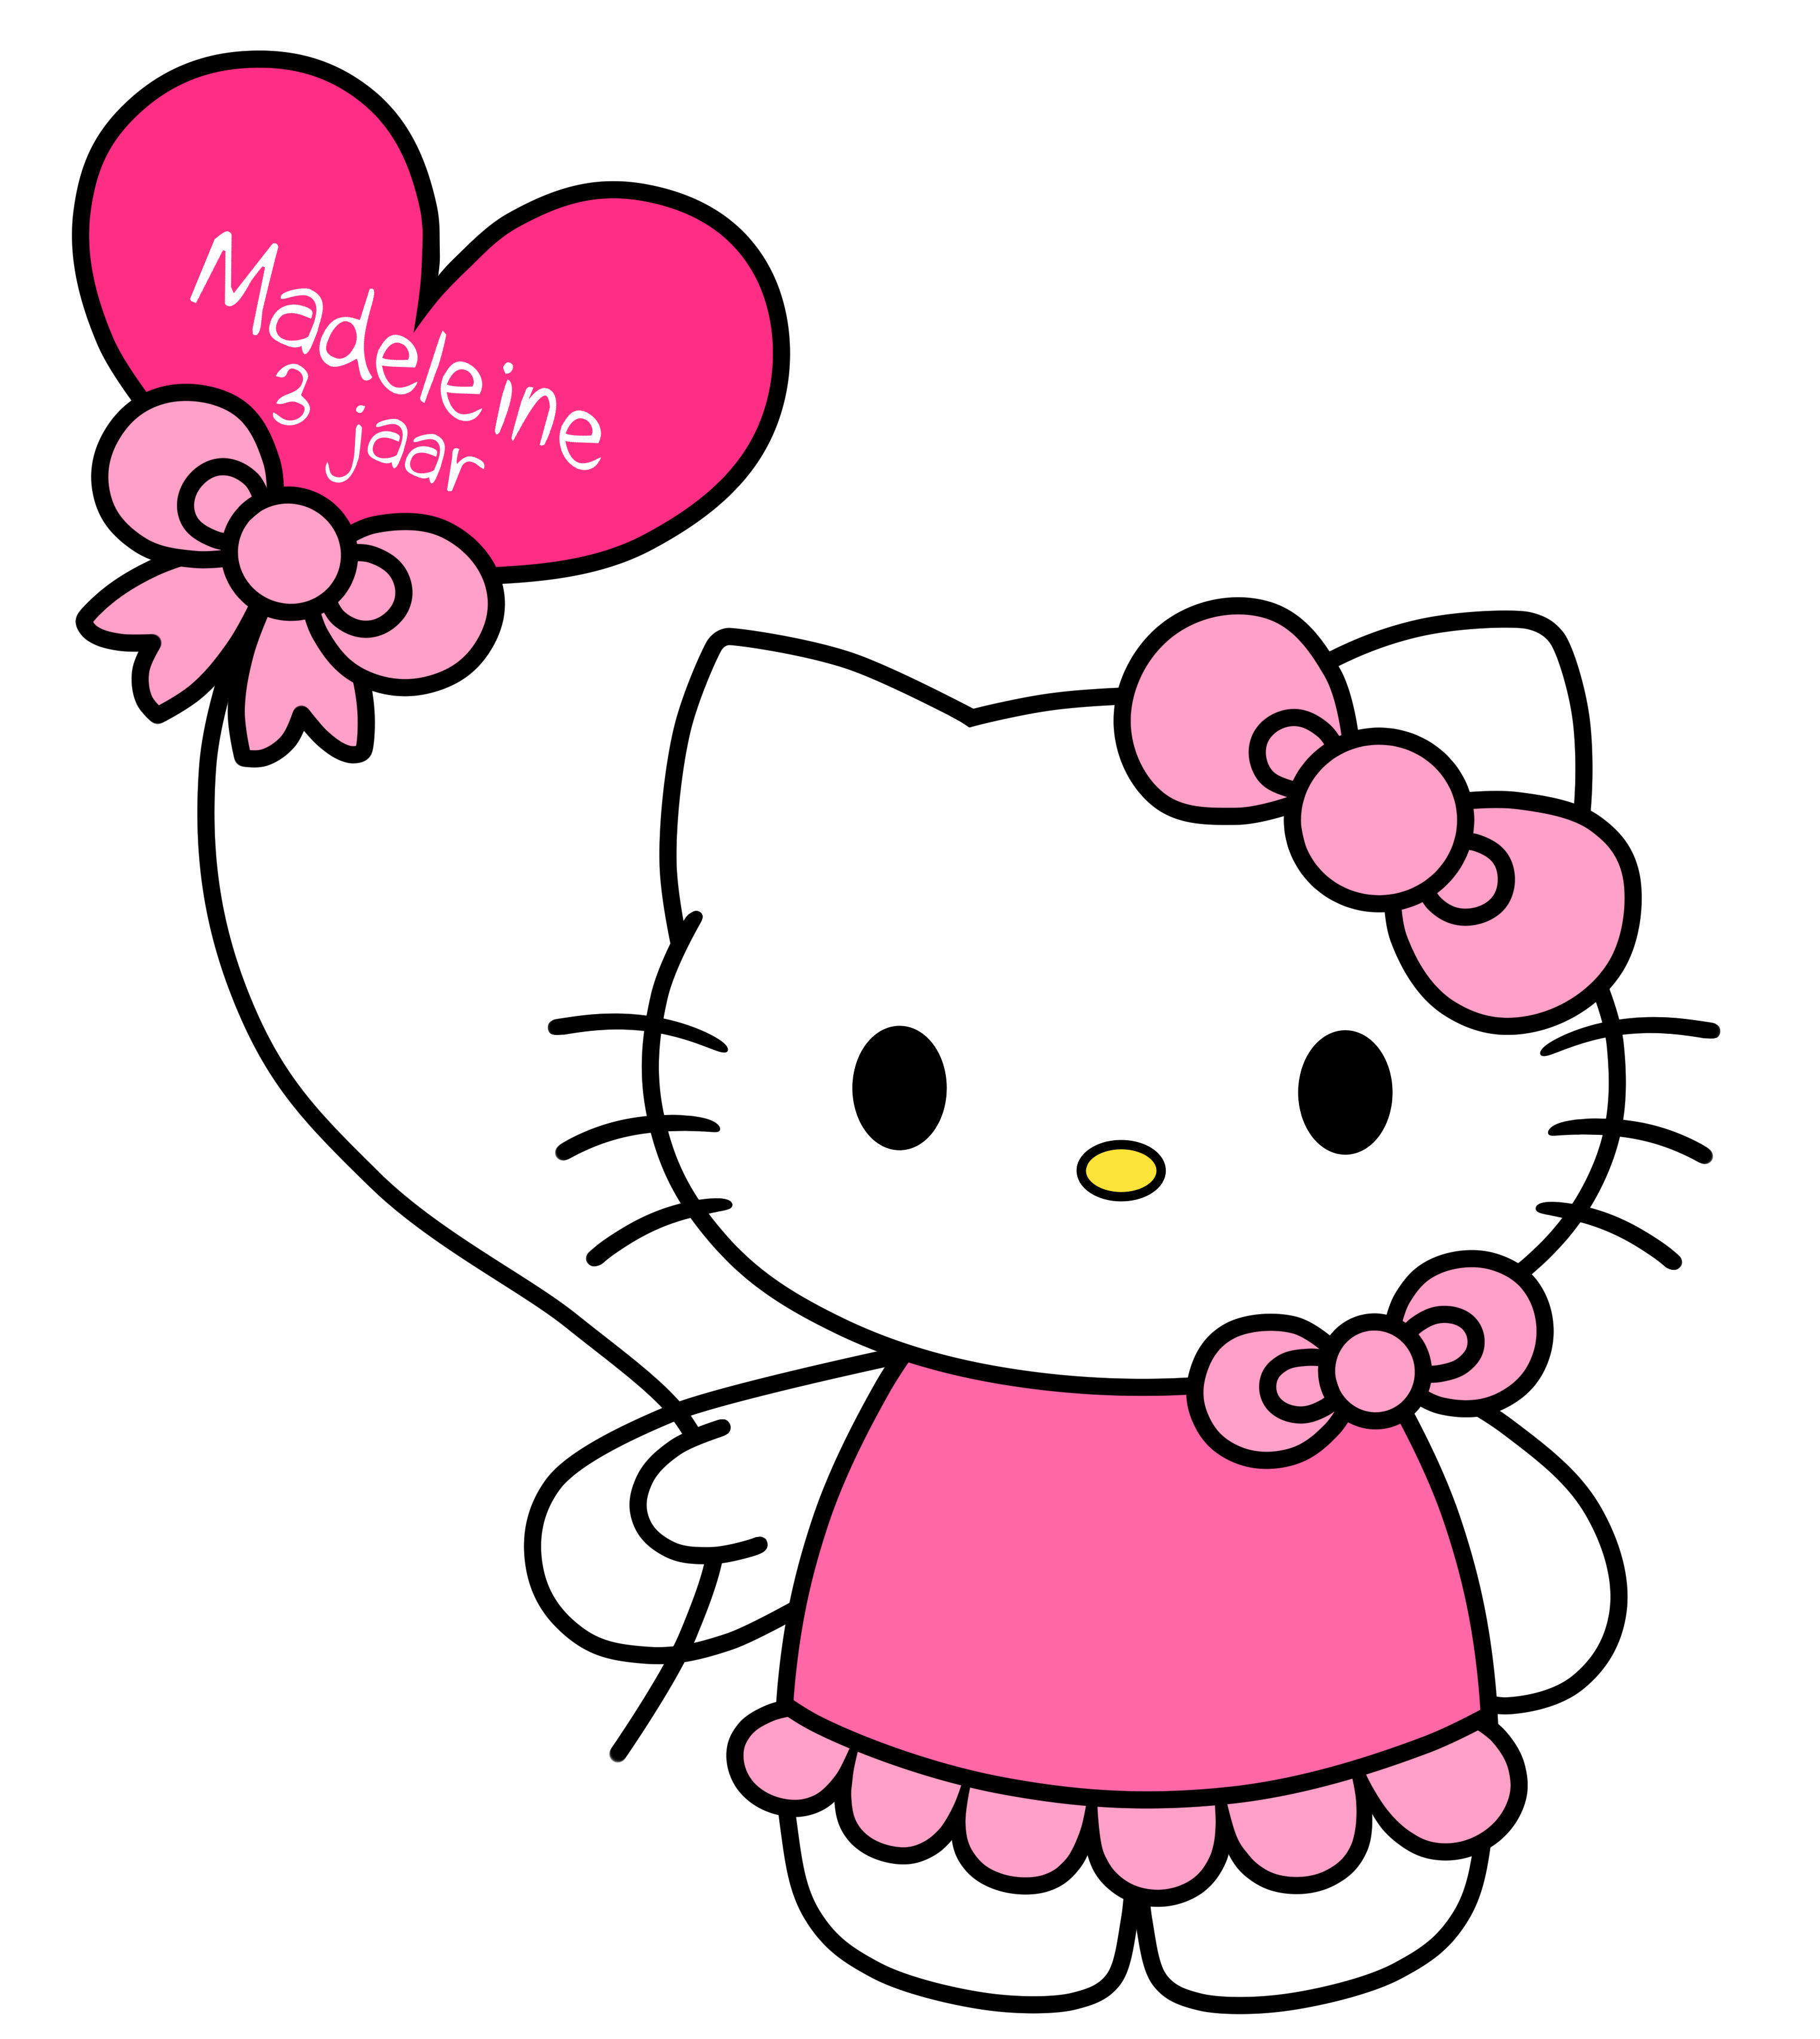 Cute pictures of Hello kitty 2015 | Tumblr Life